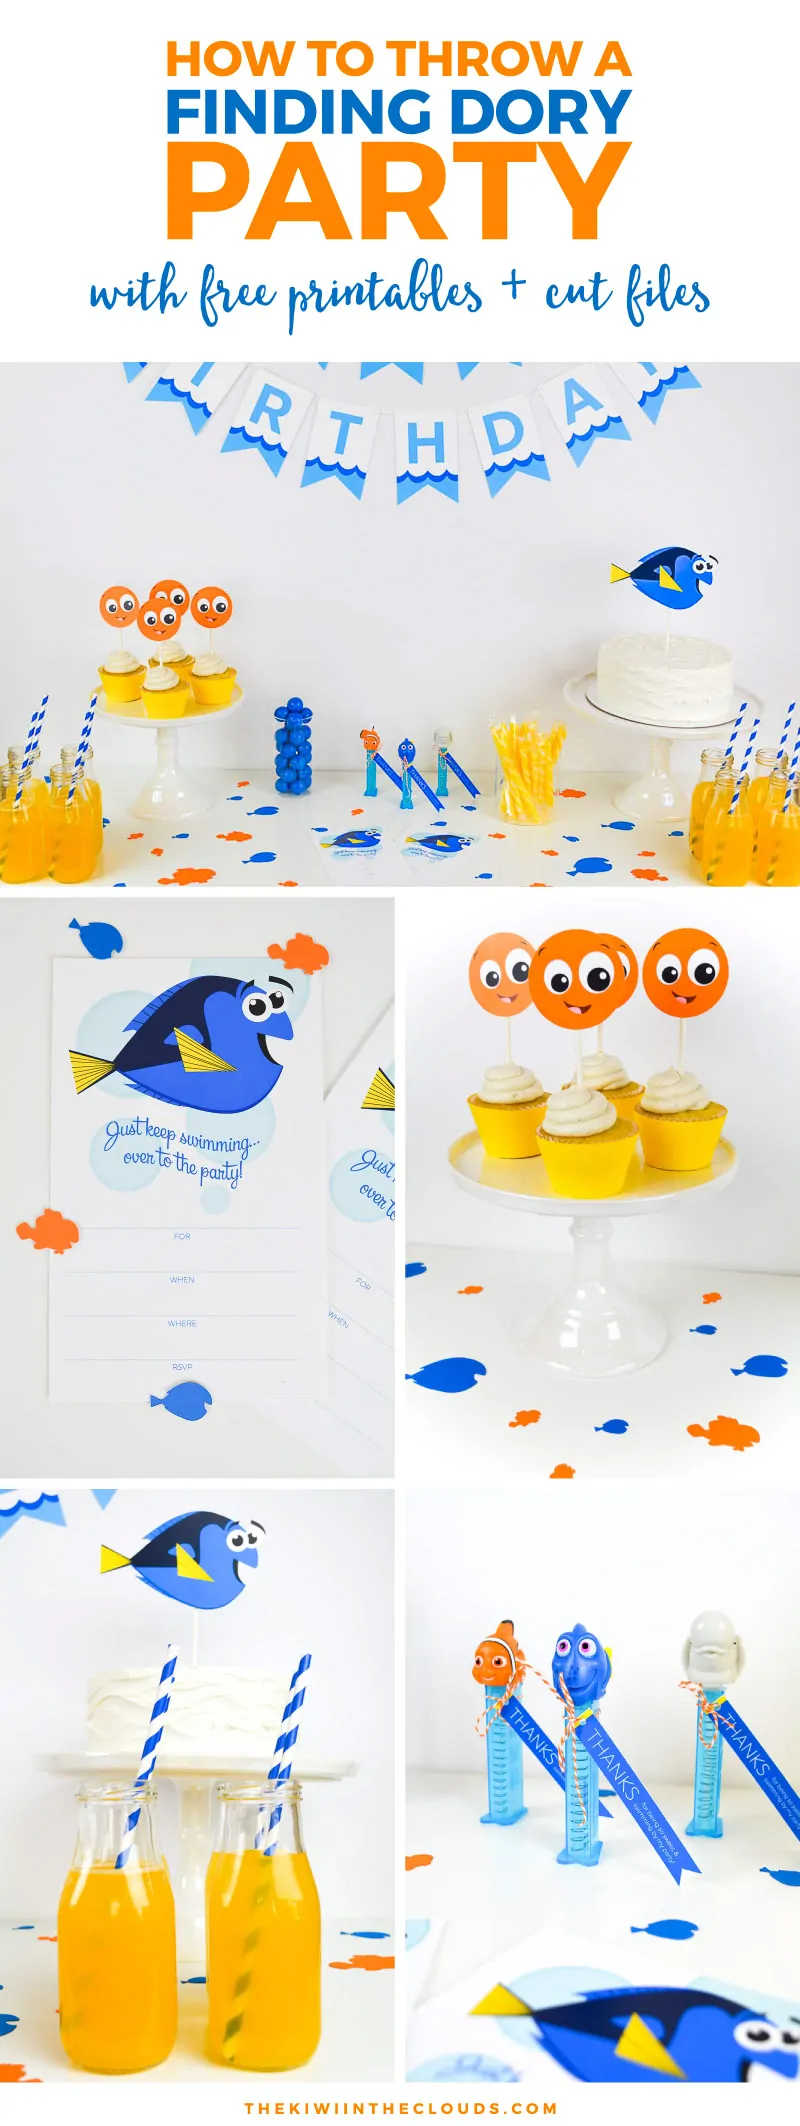 Finding Dory printables | party printables | Disney activities 